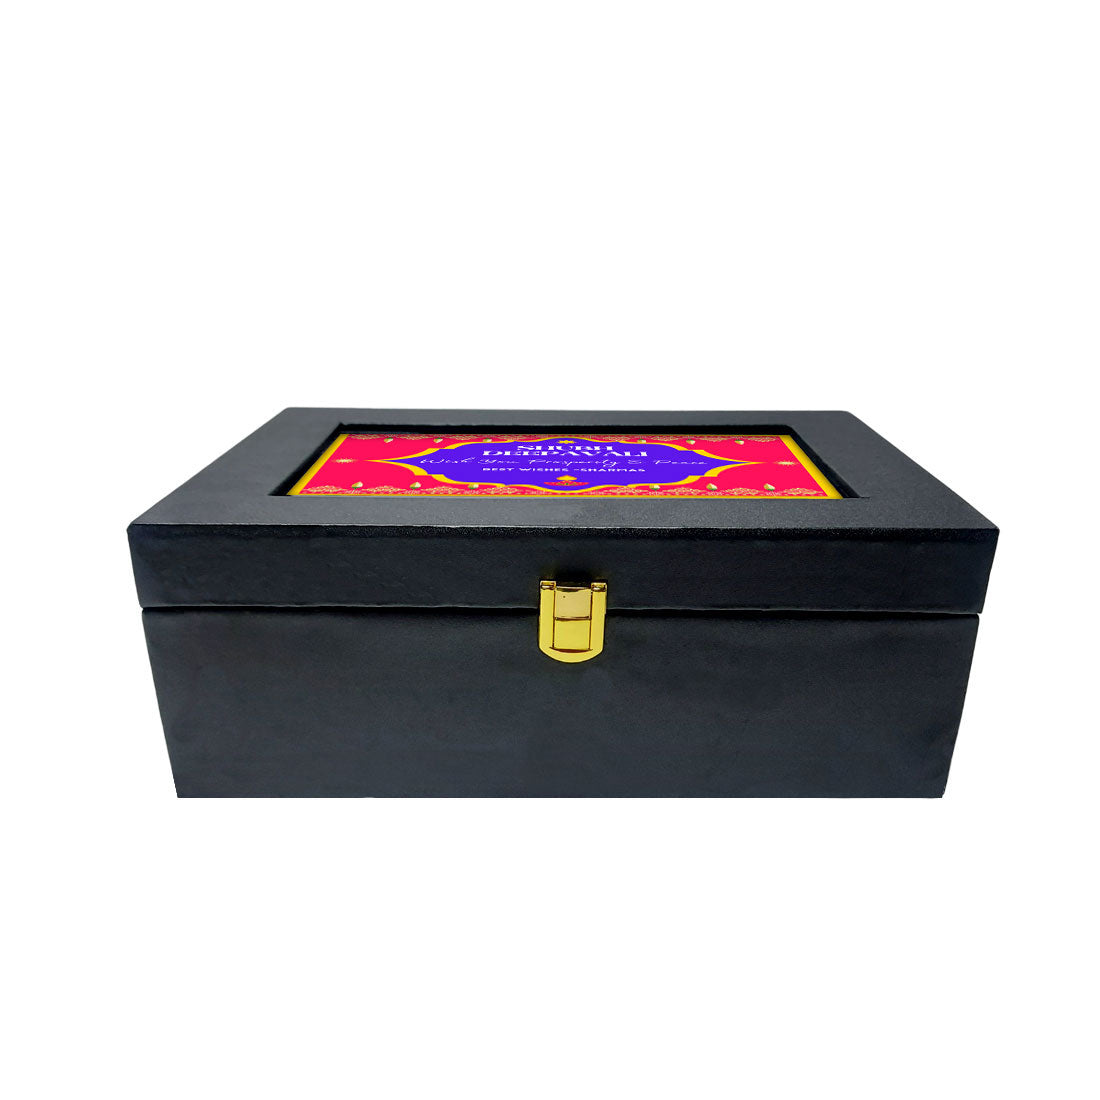 Customized Chocolate Gift Pack Box for Diwali Gifting - Add Your Message